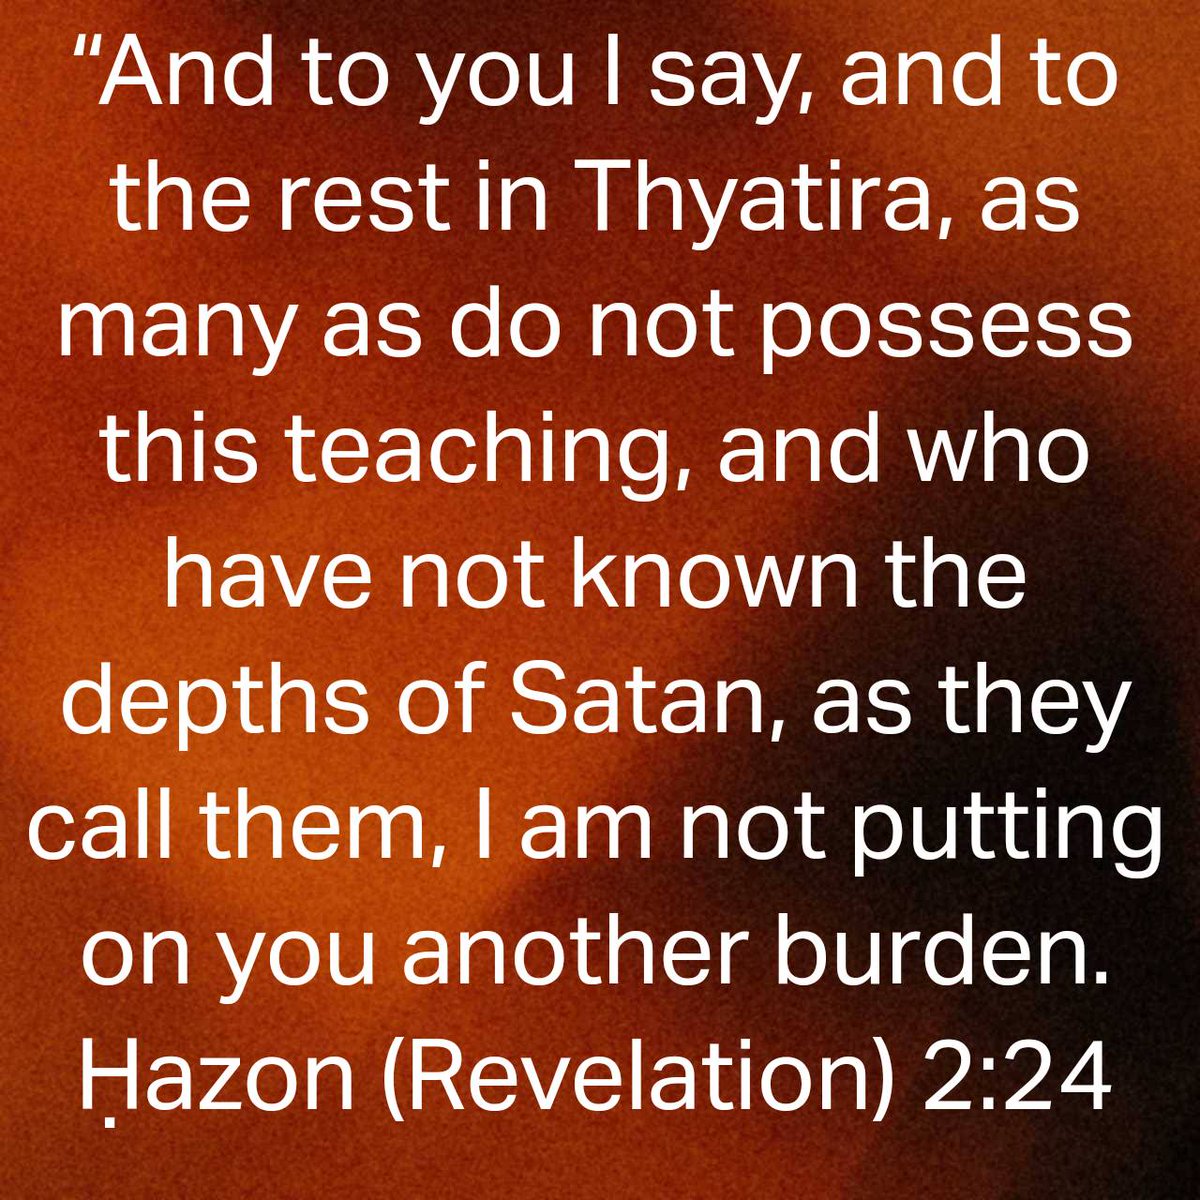 Ḥazon (Revelation) 2:24 
[24] “And to you I say, and to the rest in Thyatira, as many as do not possess this teaching, and who have not known the depths of Satan, as they call them, I am not putting on you another burden.